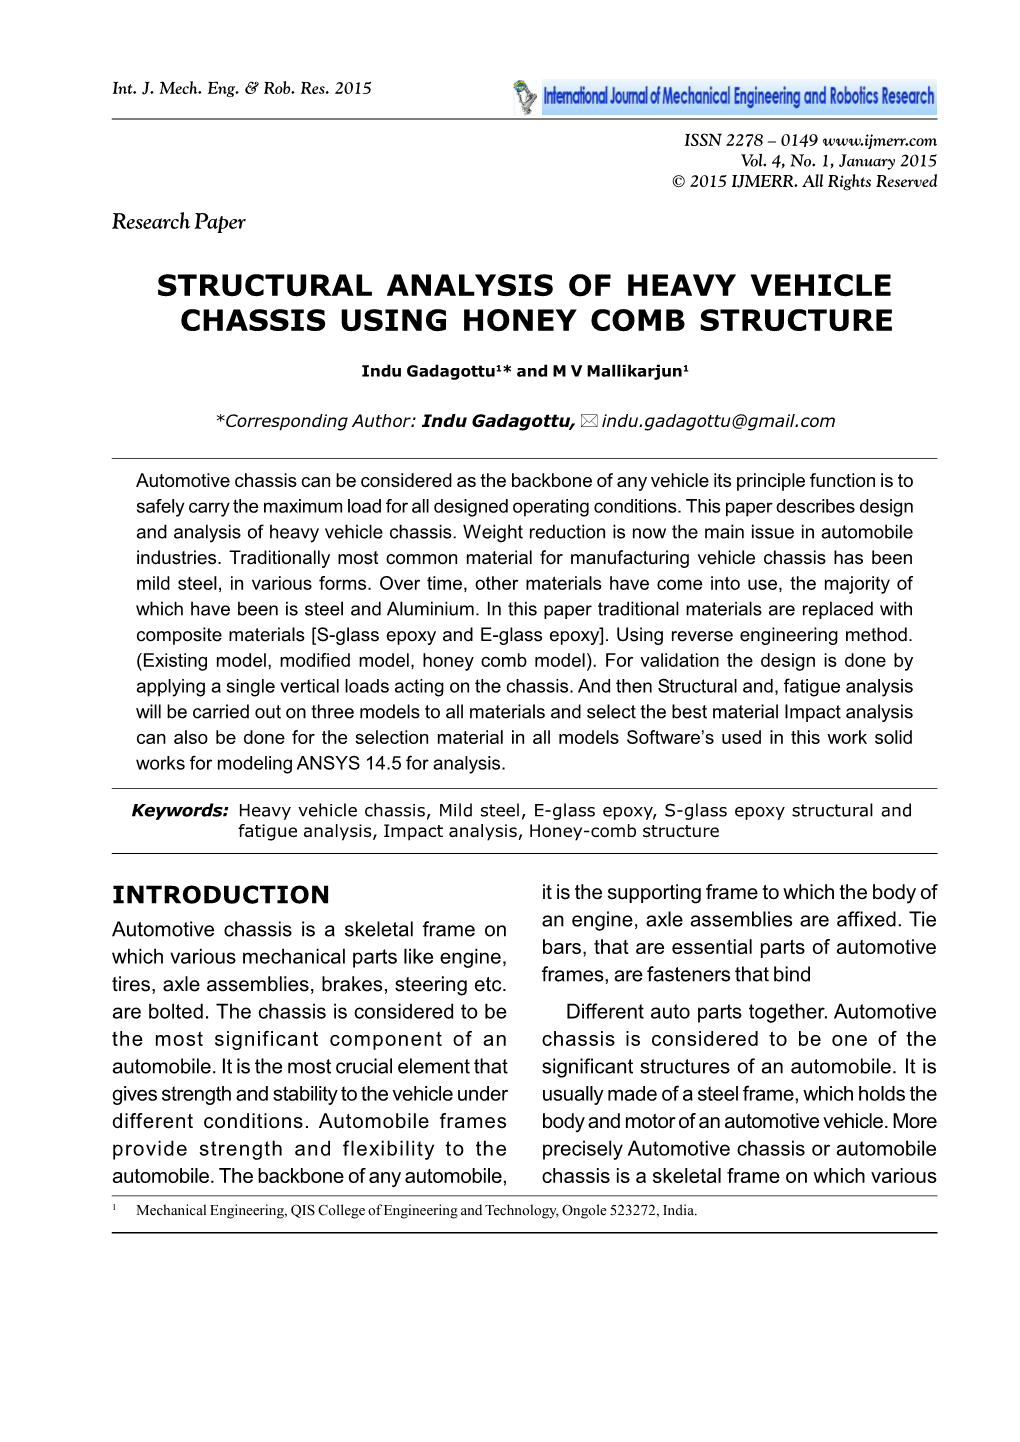 Structural Analysis of Heavy Vehicle Chassis Using Honey Comb Structure